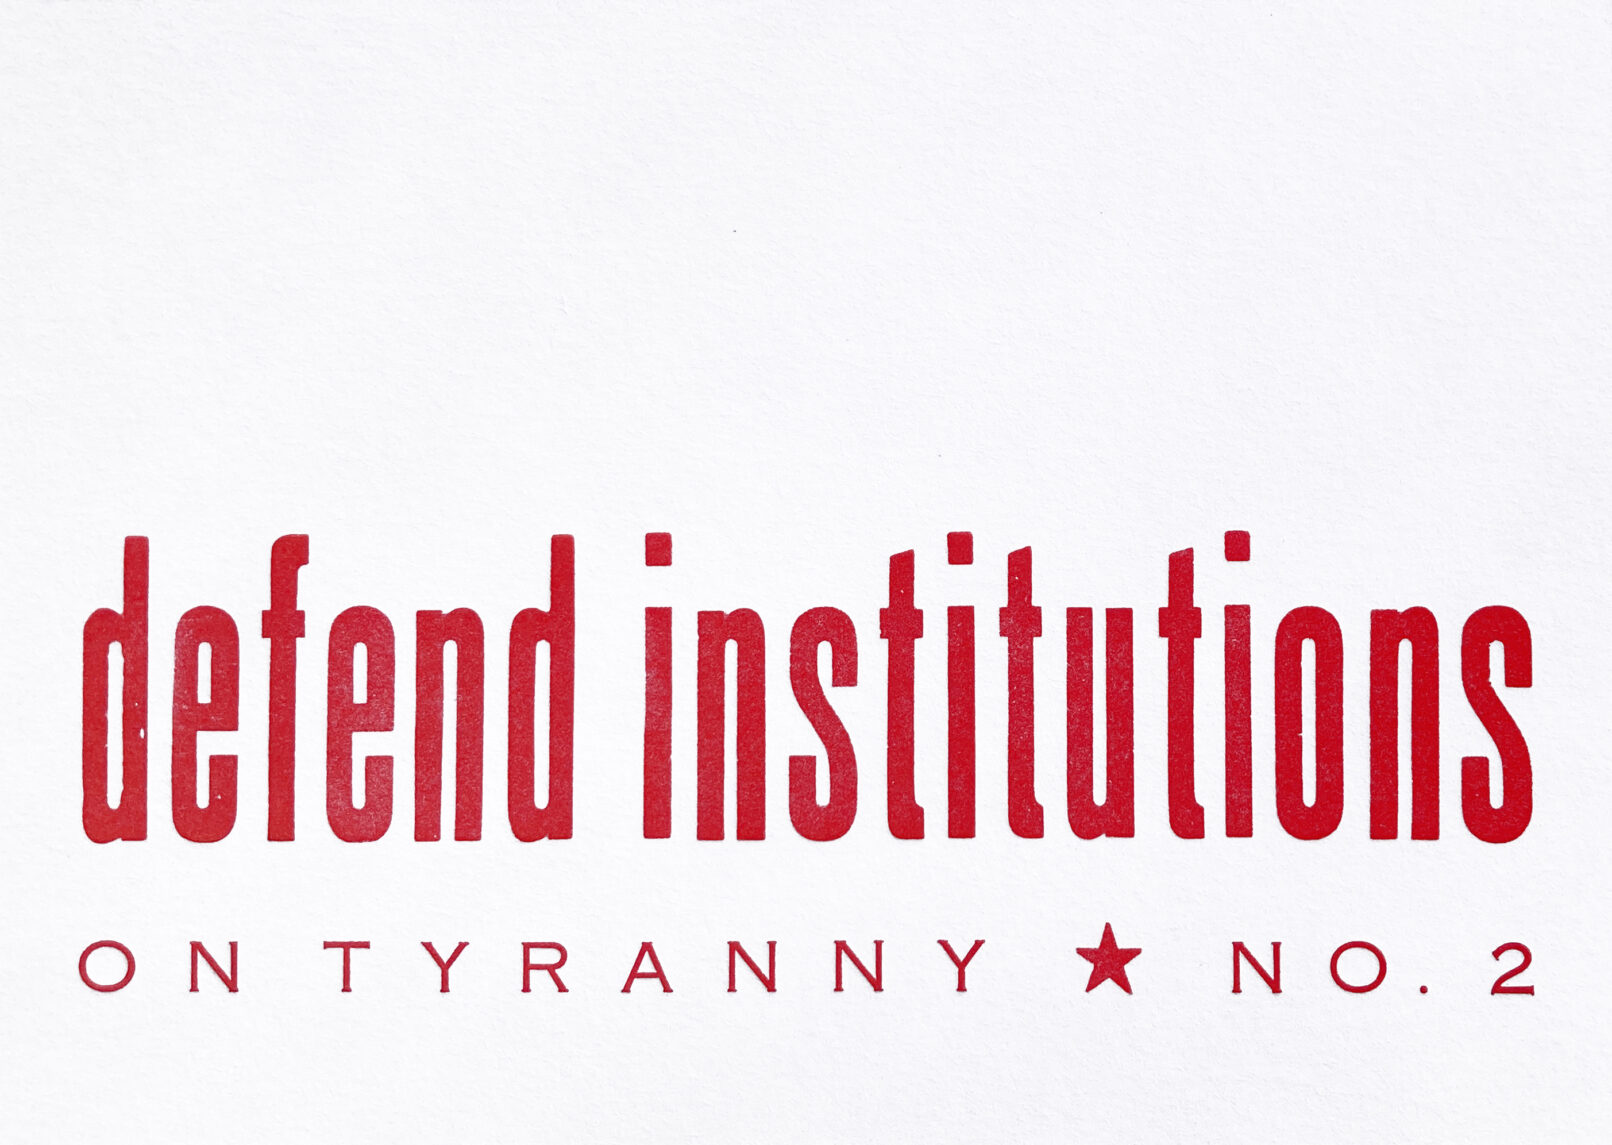 Letterpress print in red ink on white paper with text that reads "Defend Institutions On Tyranny No. 2"